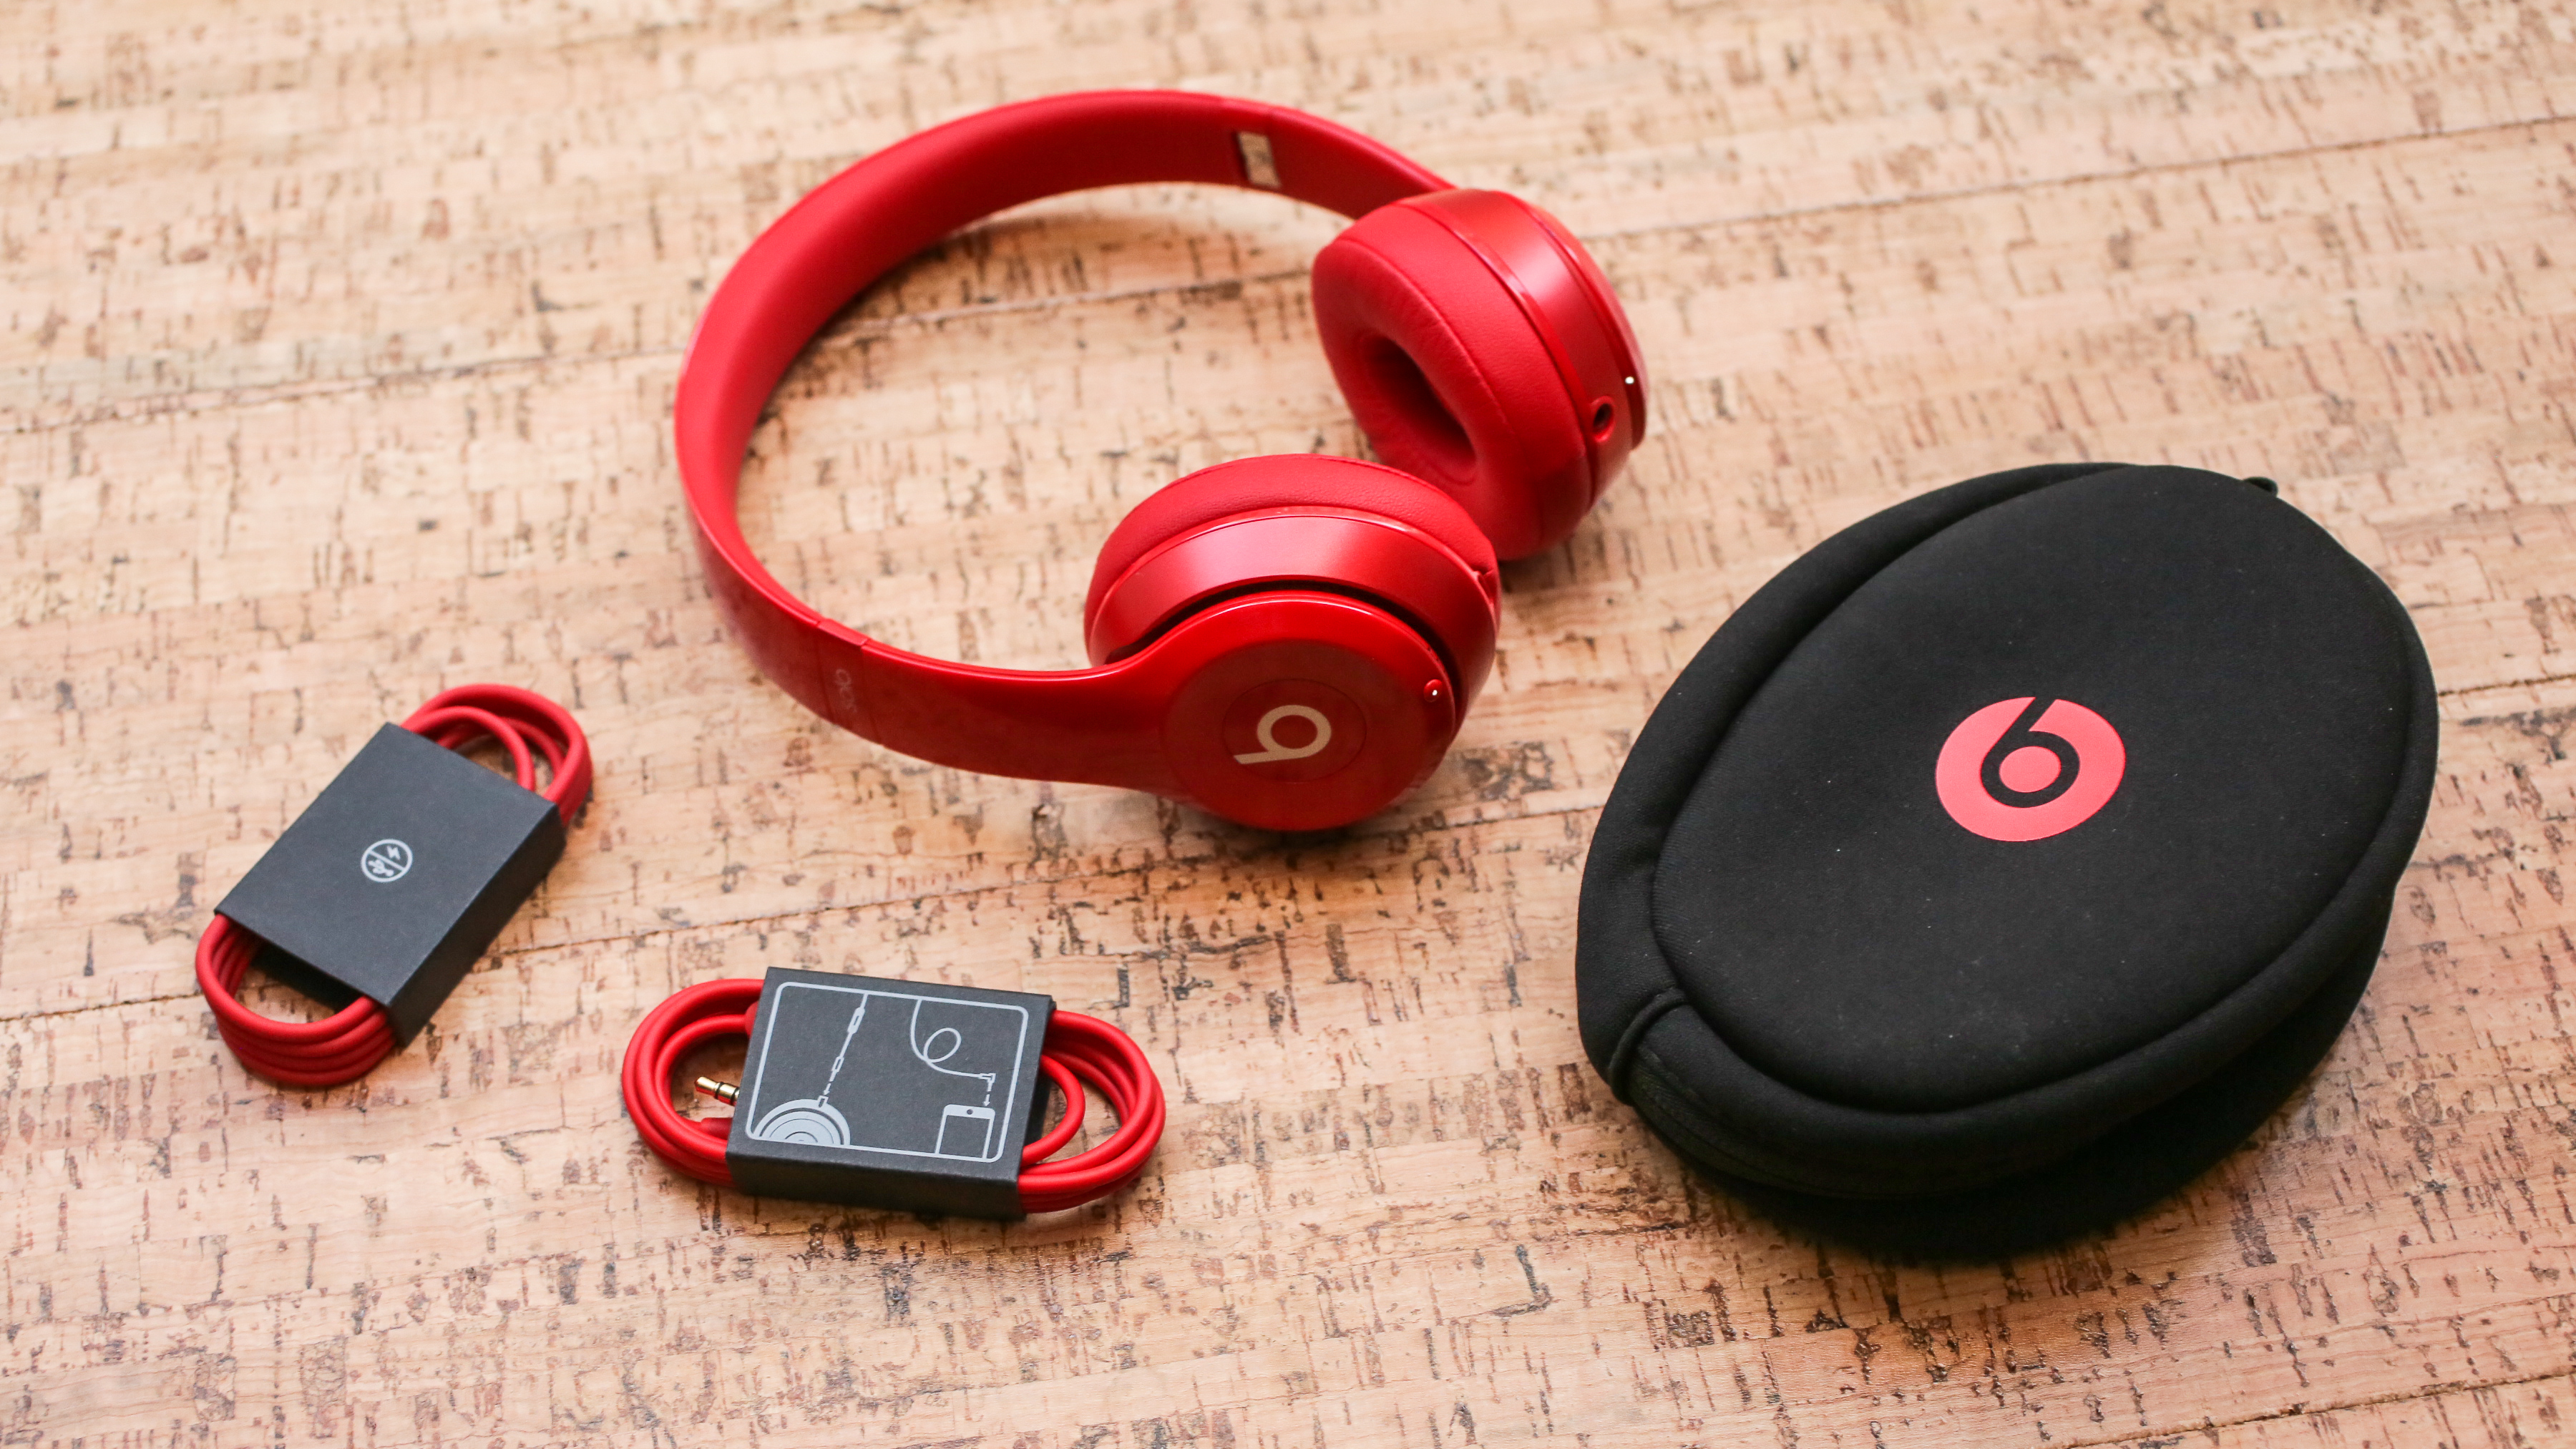 beats solo 2 product red